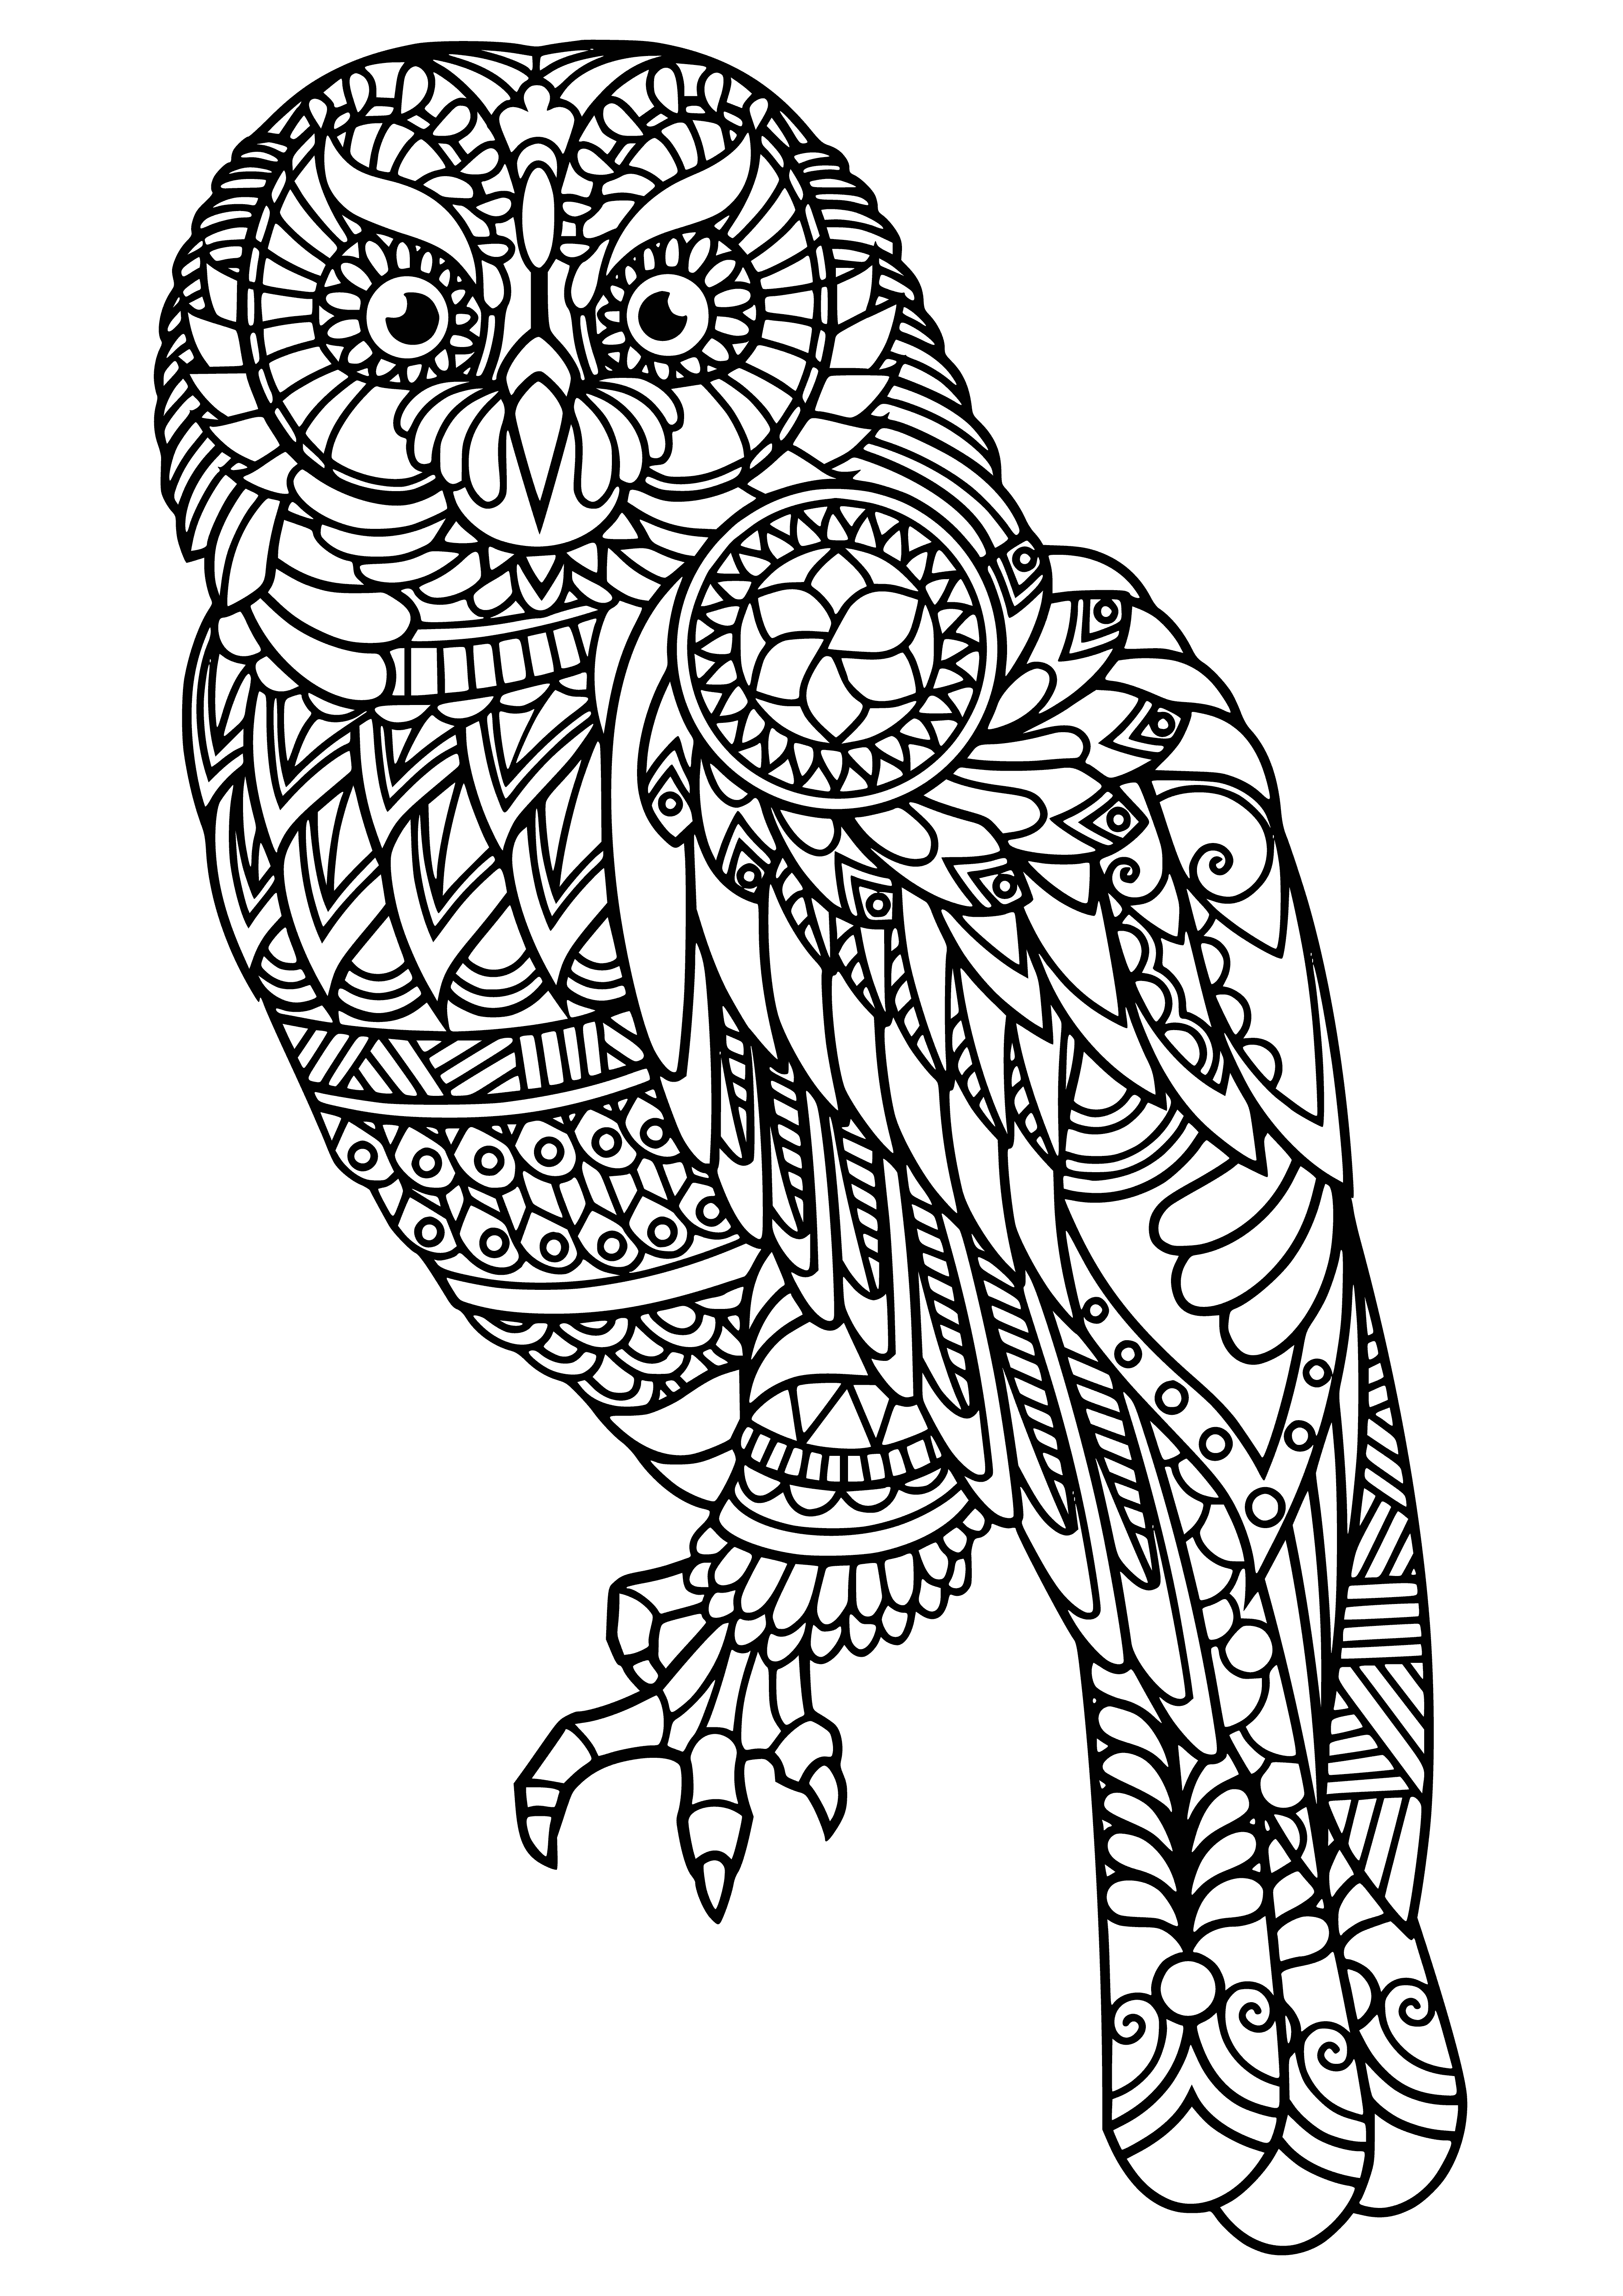 coloring page: A wise owl perched atop a stump, brown feathers with darker stripes, soft blue background. #coloringowls #anti-stressowls